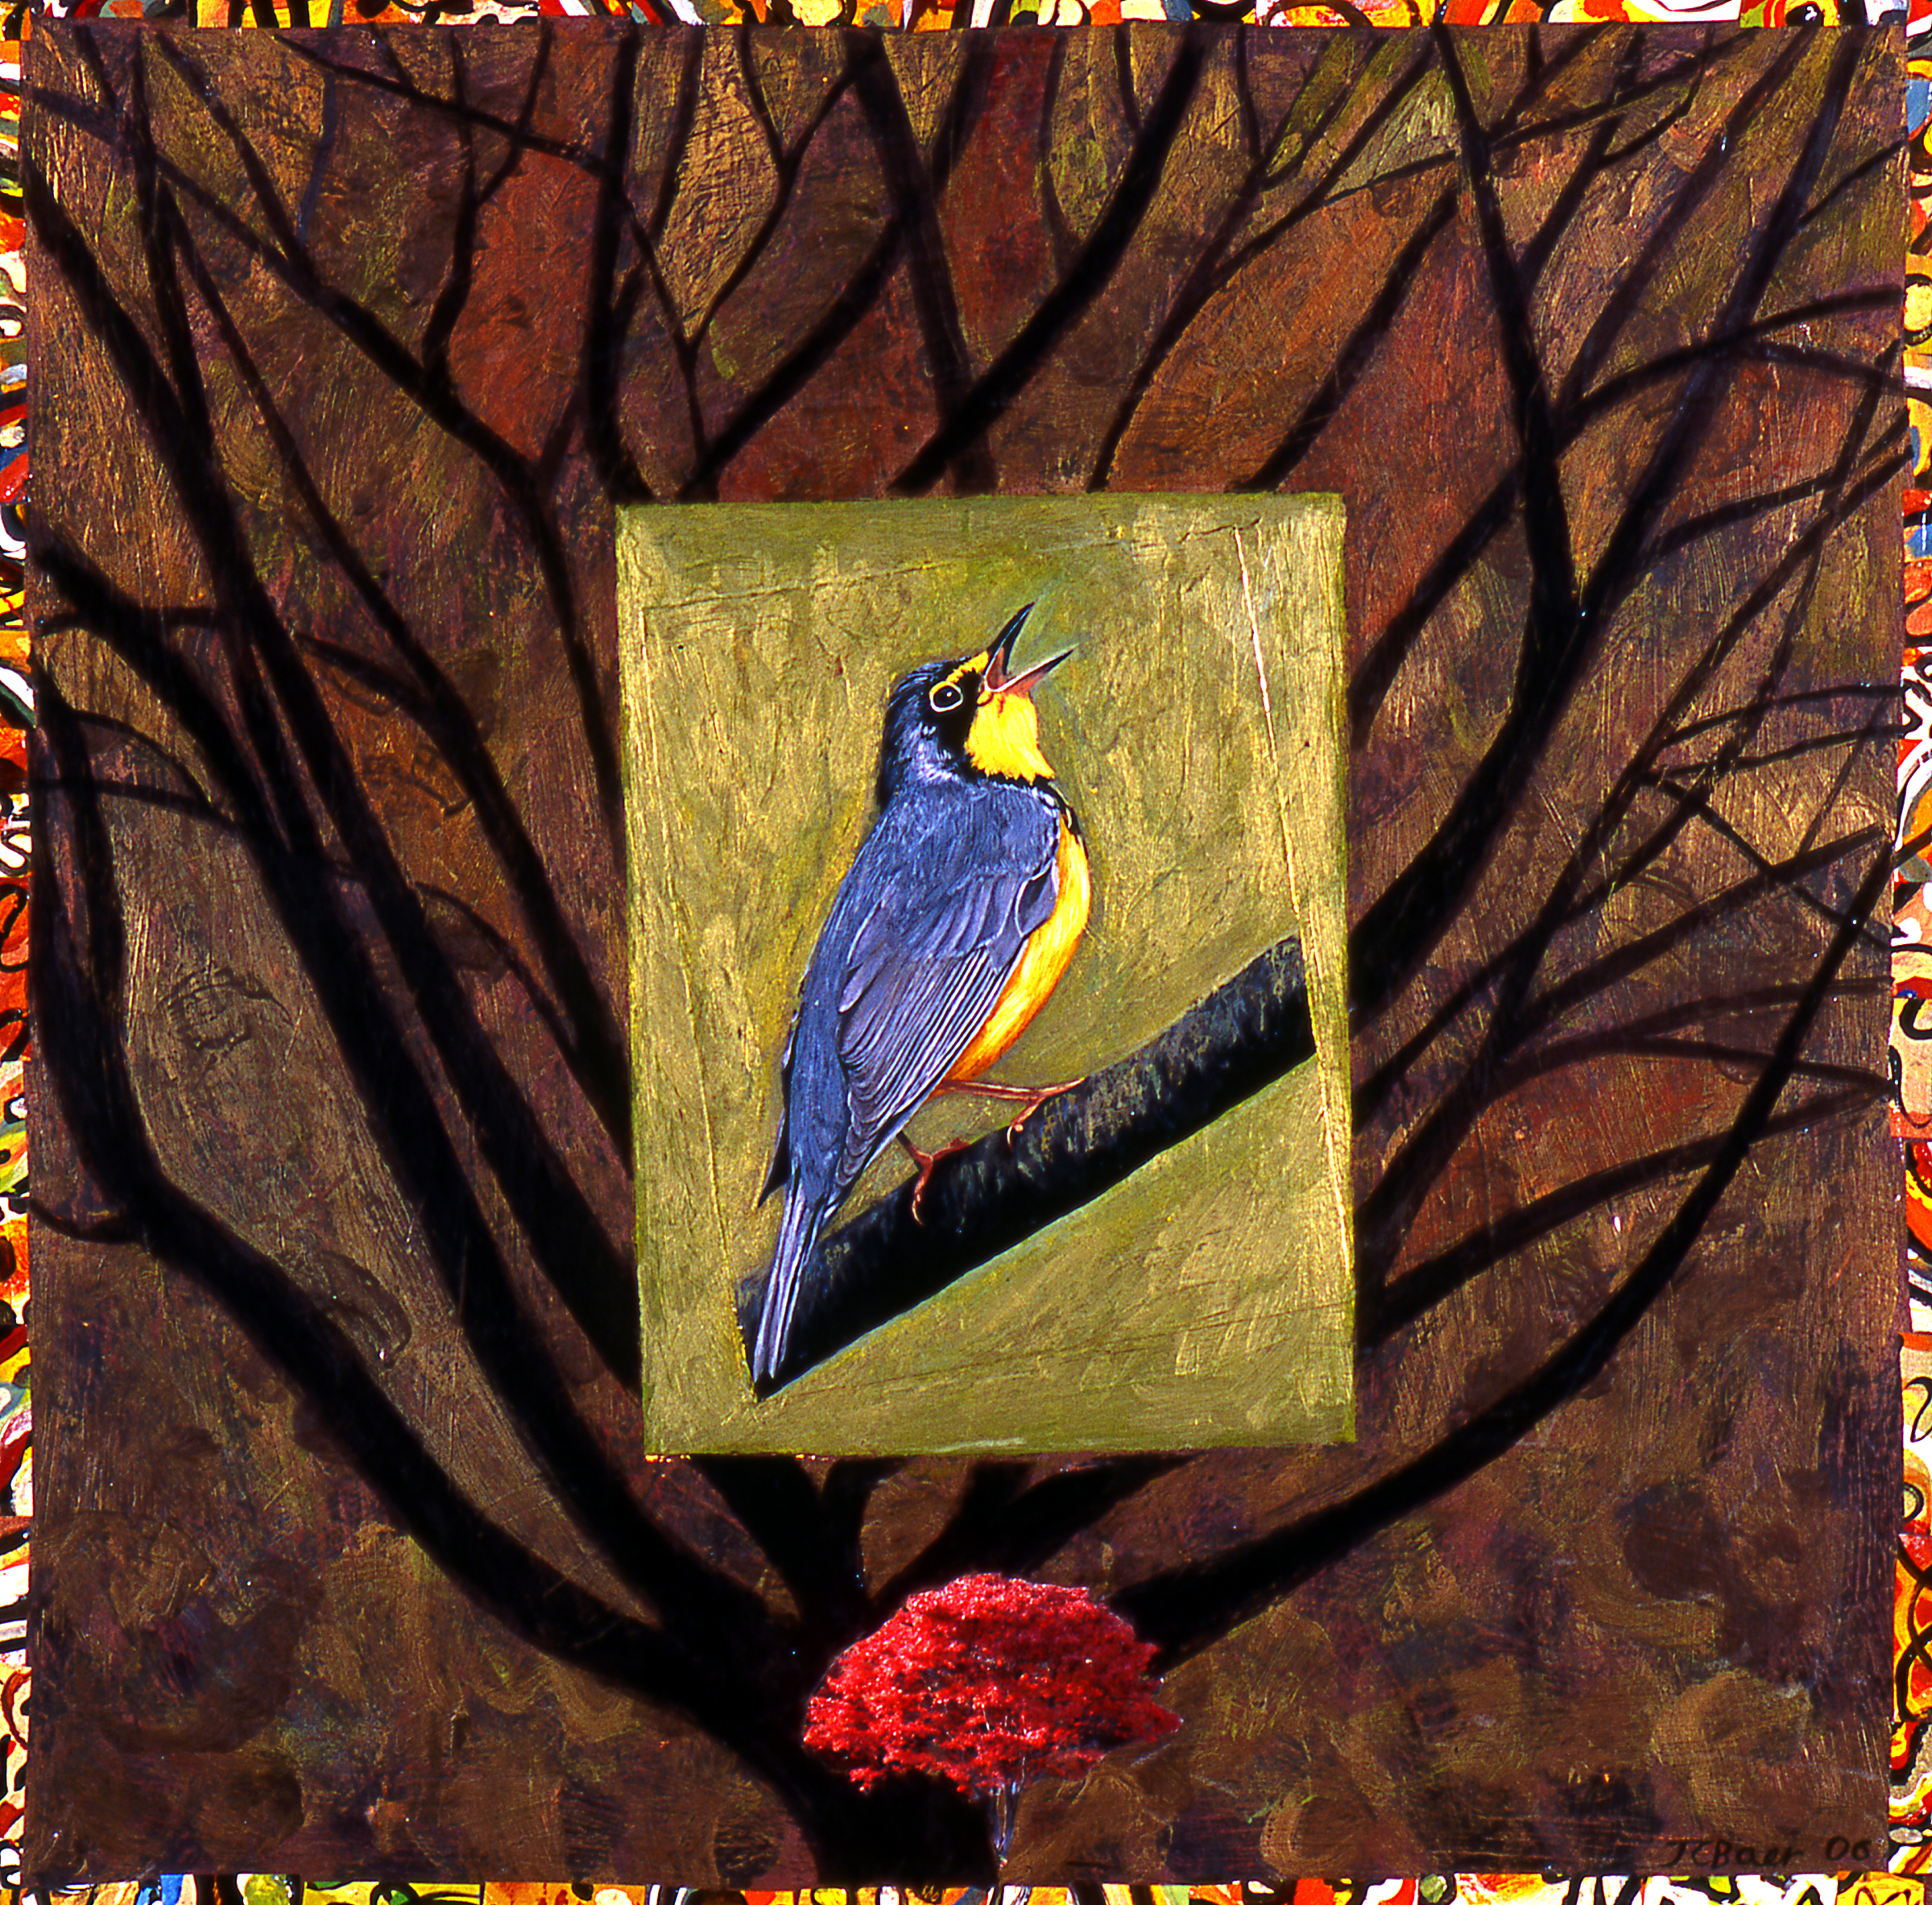 Canada Warbler, 2006, 24” x 24”, mixed media gouache and acrylic on wood panel, $2500